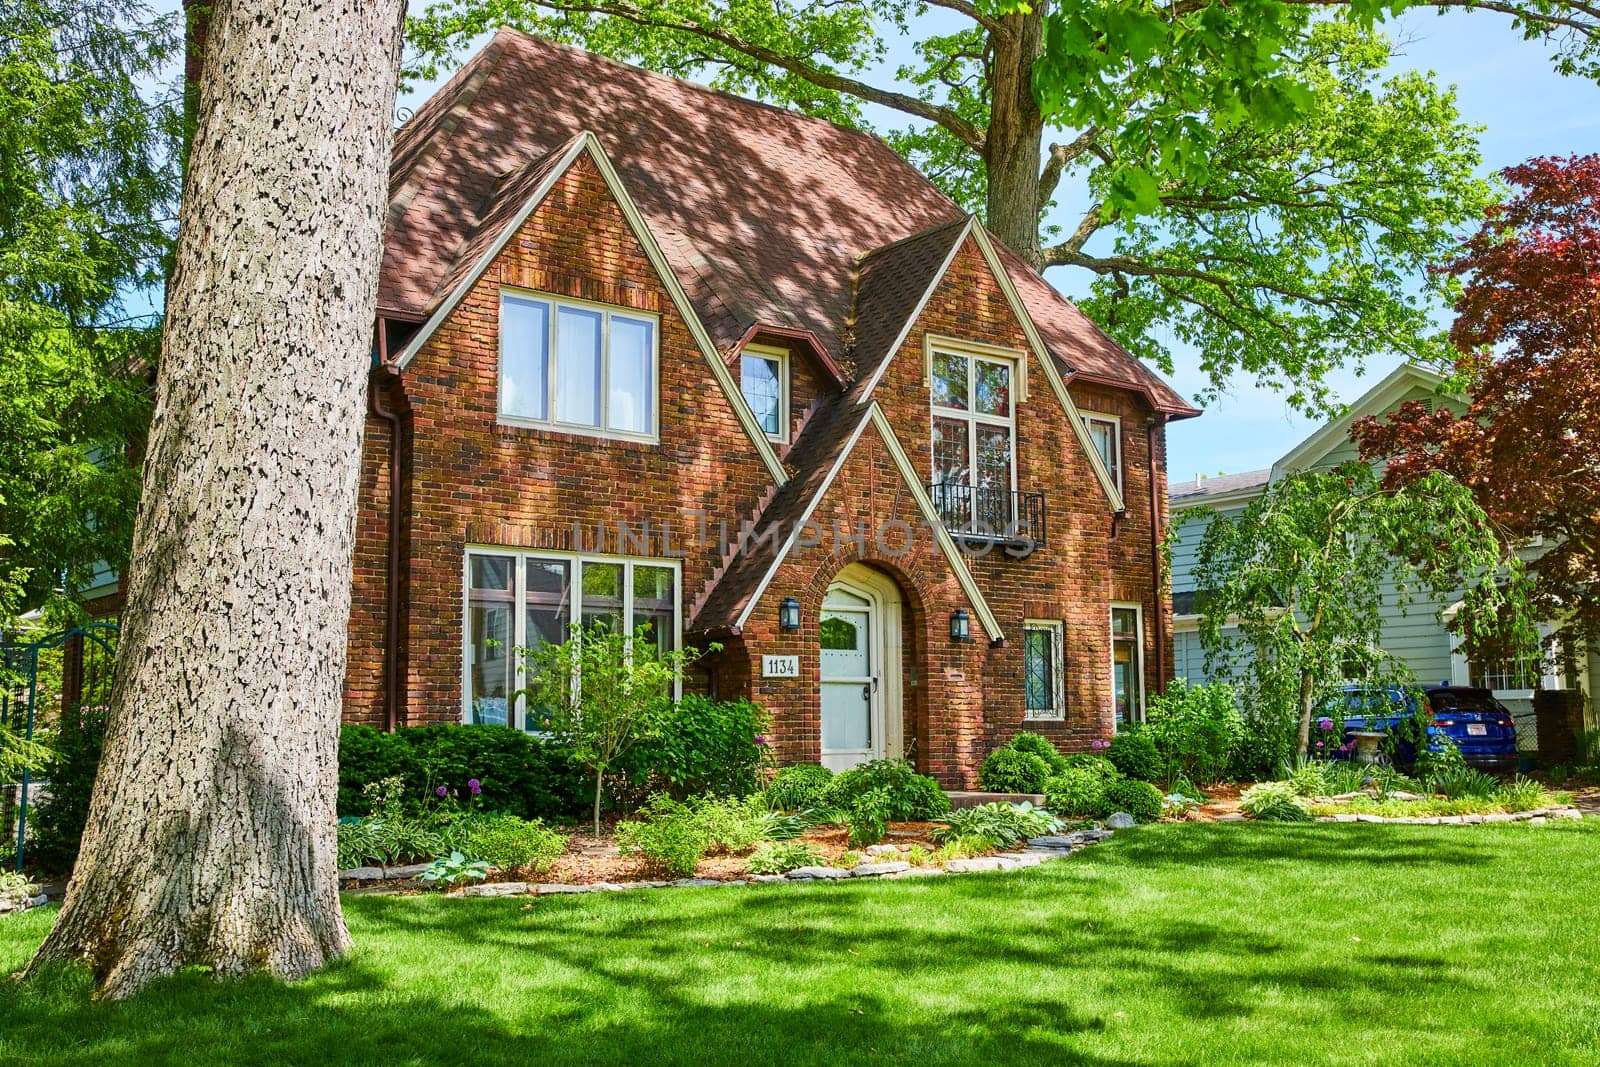 Traditional two-story brick house in Fort Wayne's historic South Wayne district, surrounded by lush greenery.